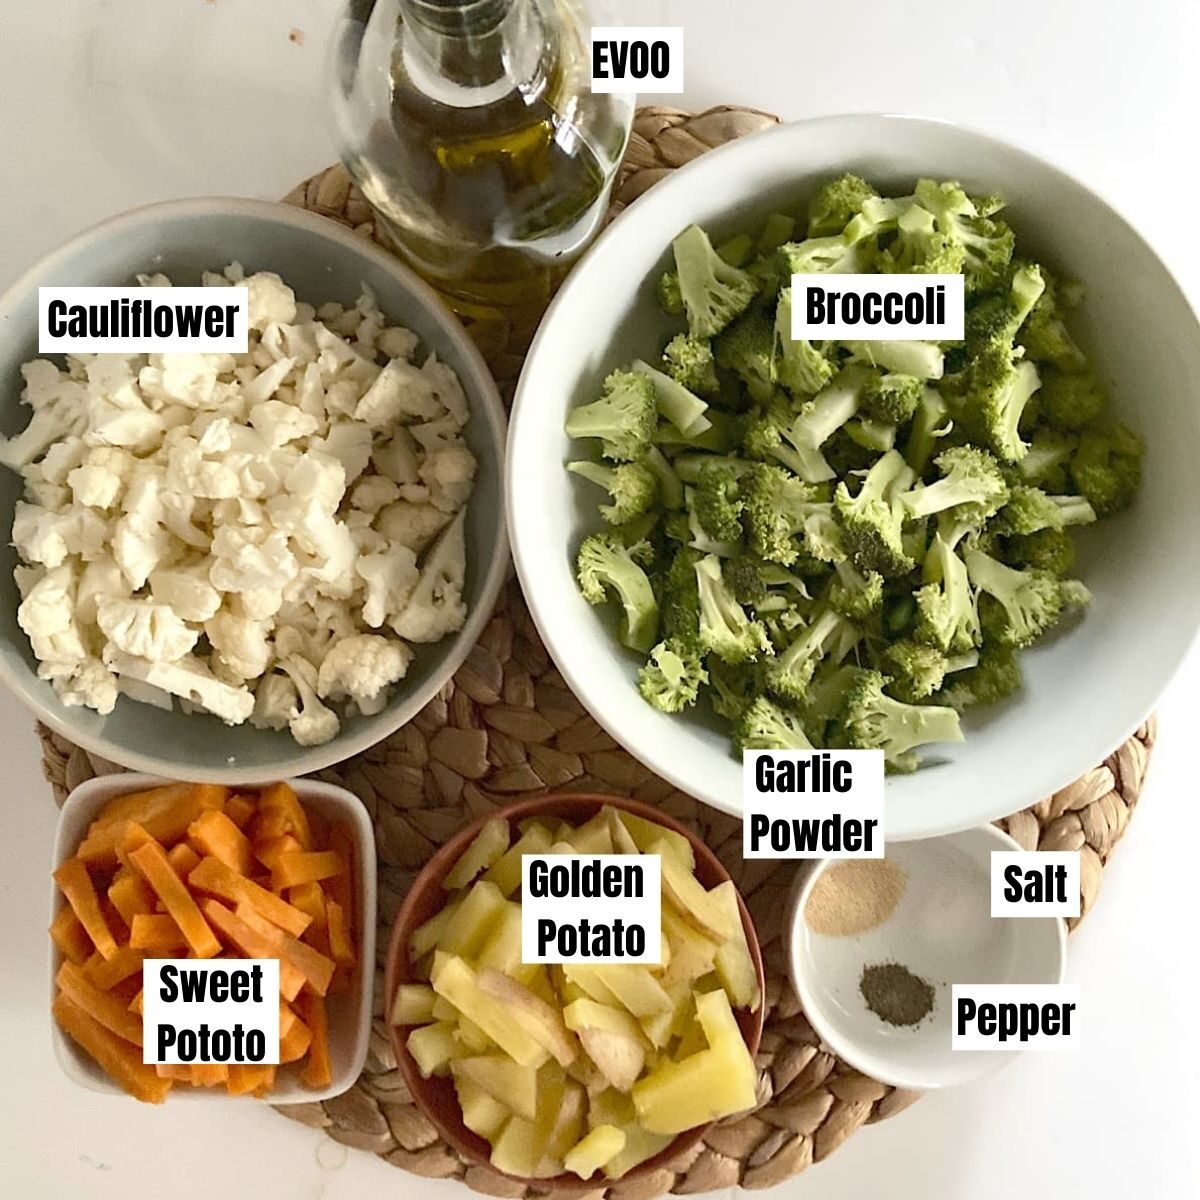 measured ingredients for sauteed potatoes